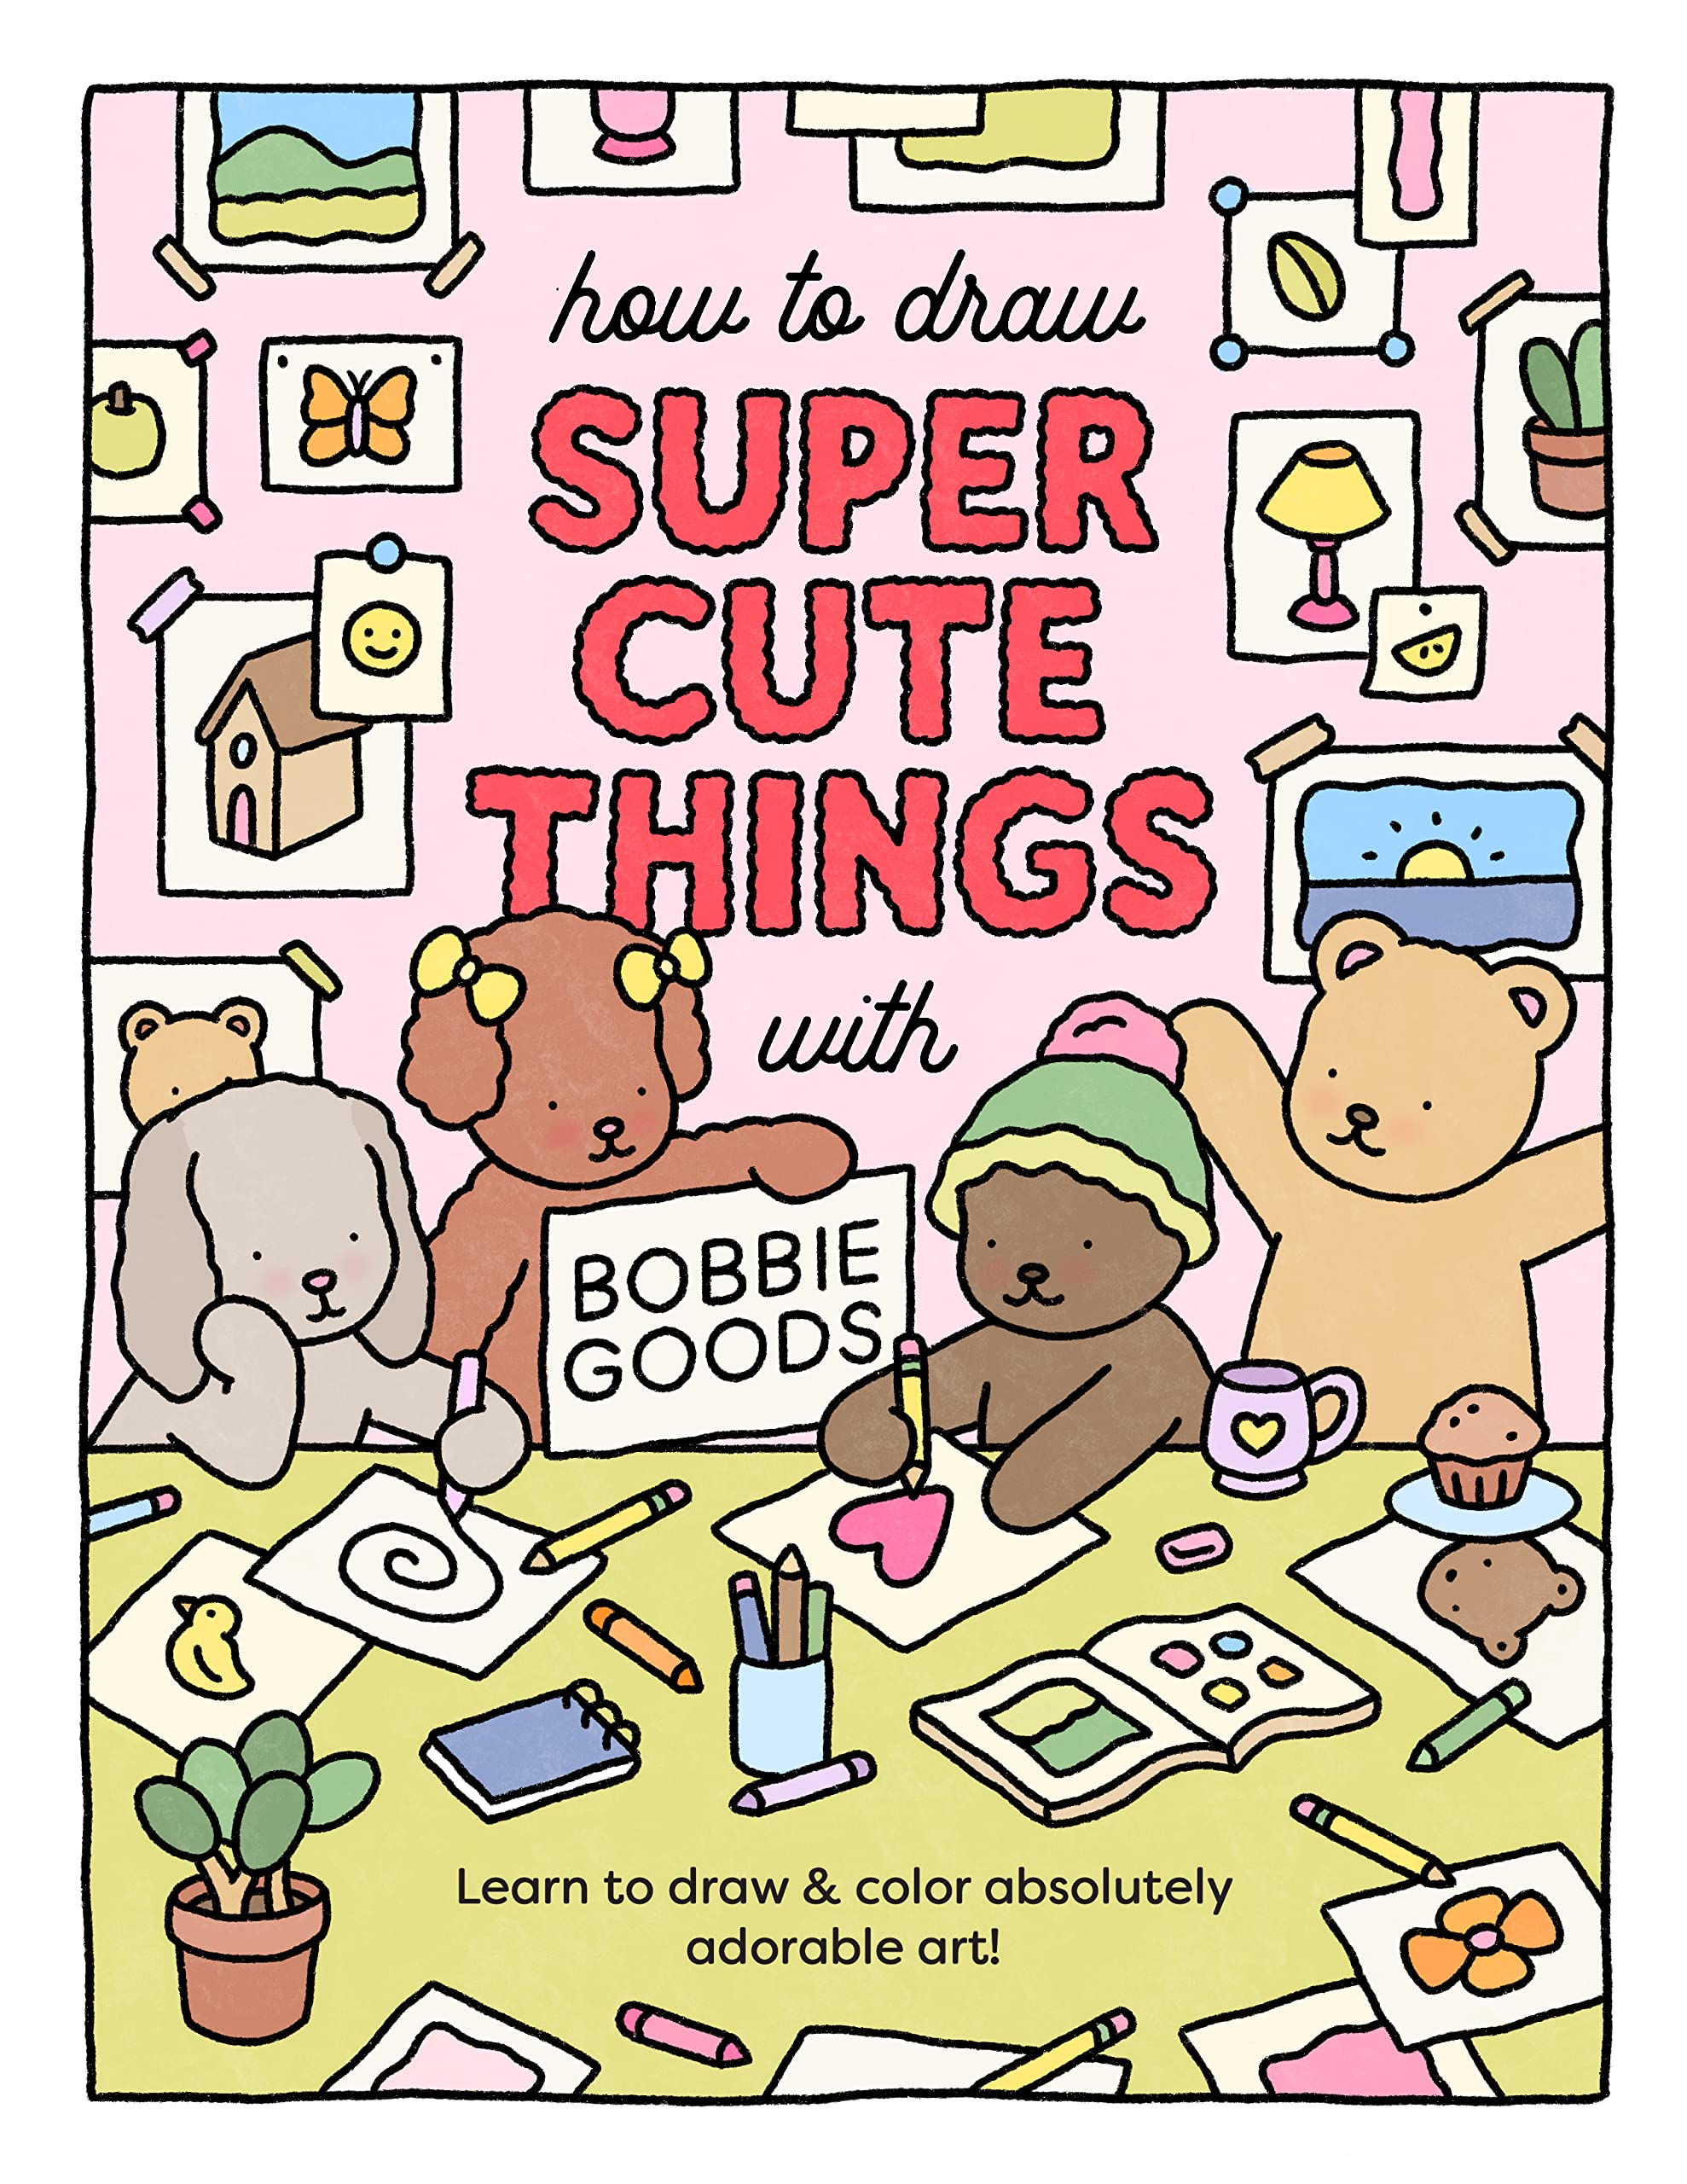 How to Draw Super Cute Things with Bobbie Goods: Learn to Draw & Color Absolutely Adorable Art! by Goods, Bobbie